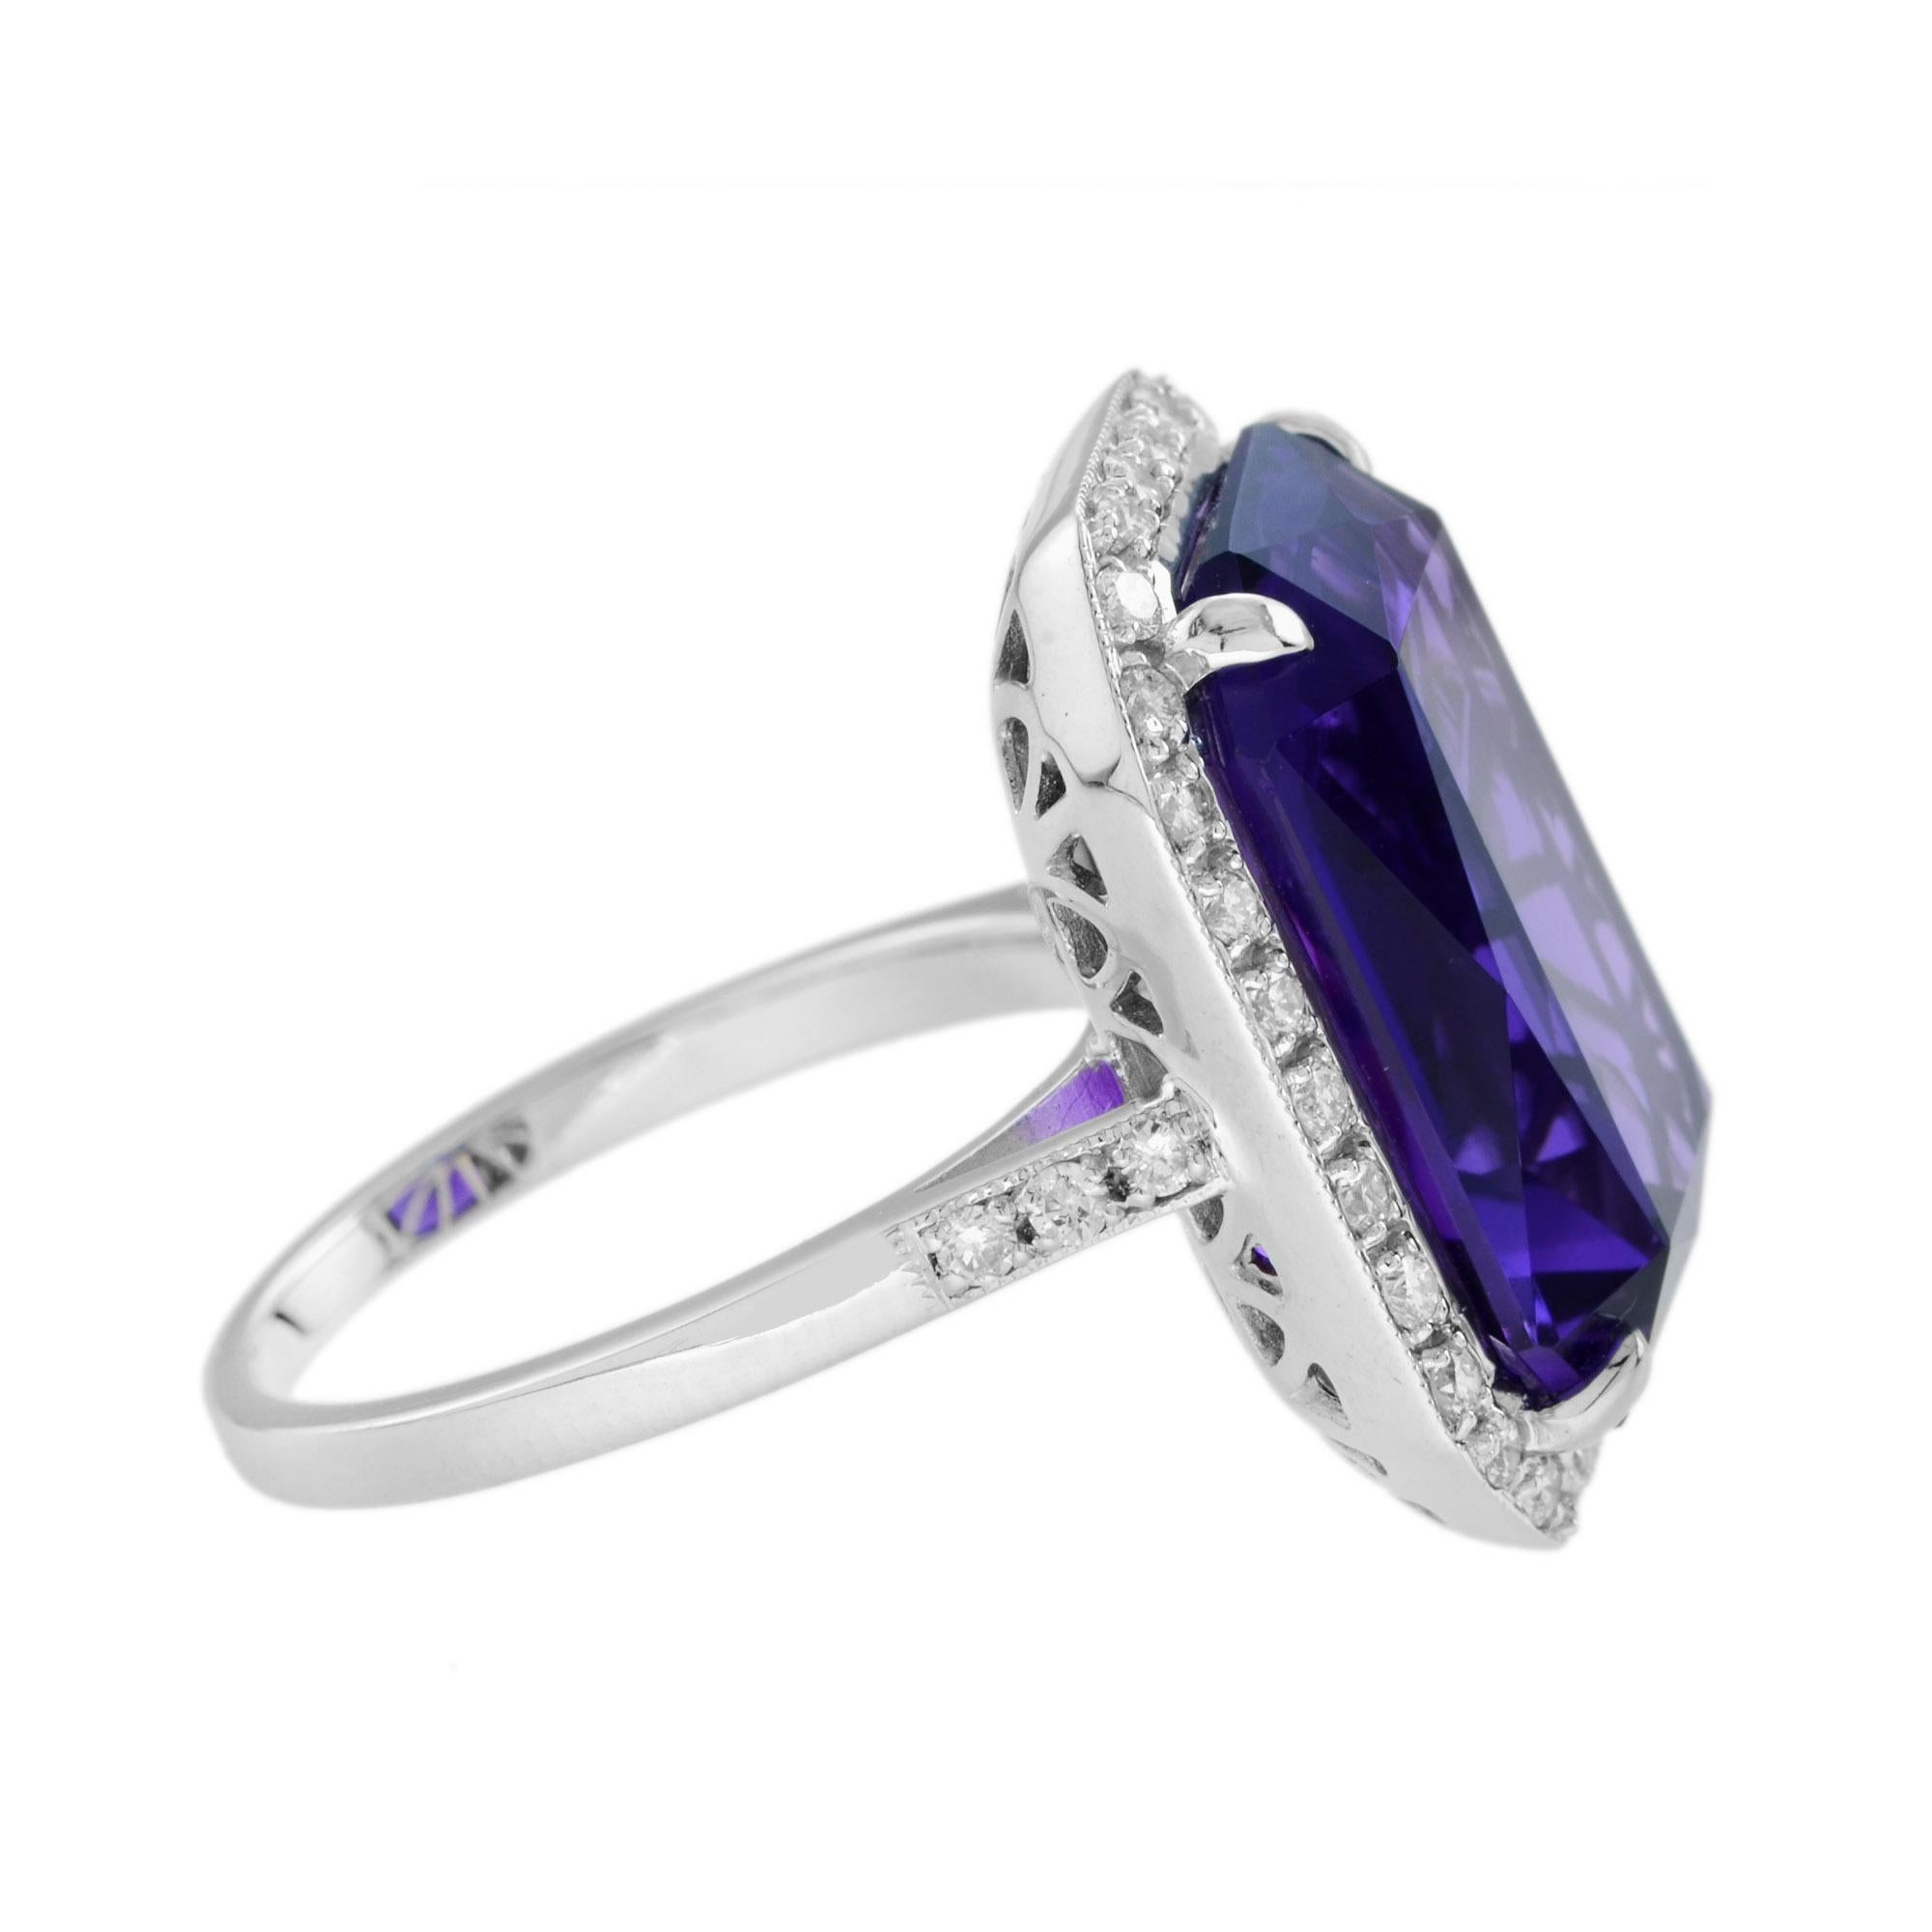 Women's Certified 11.75 Ct. Amethyst and Diamond Halo Art Deco Style Ring in 14K Gold